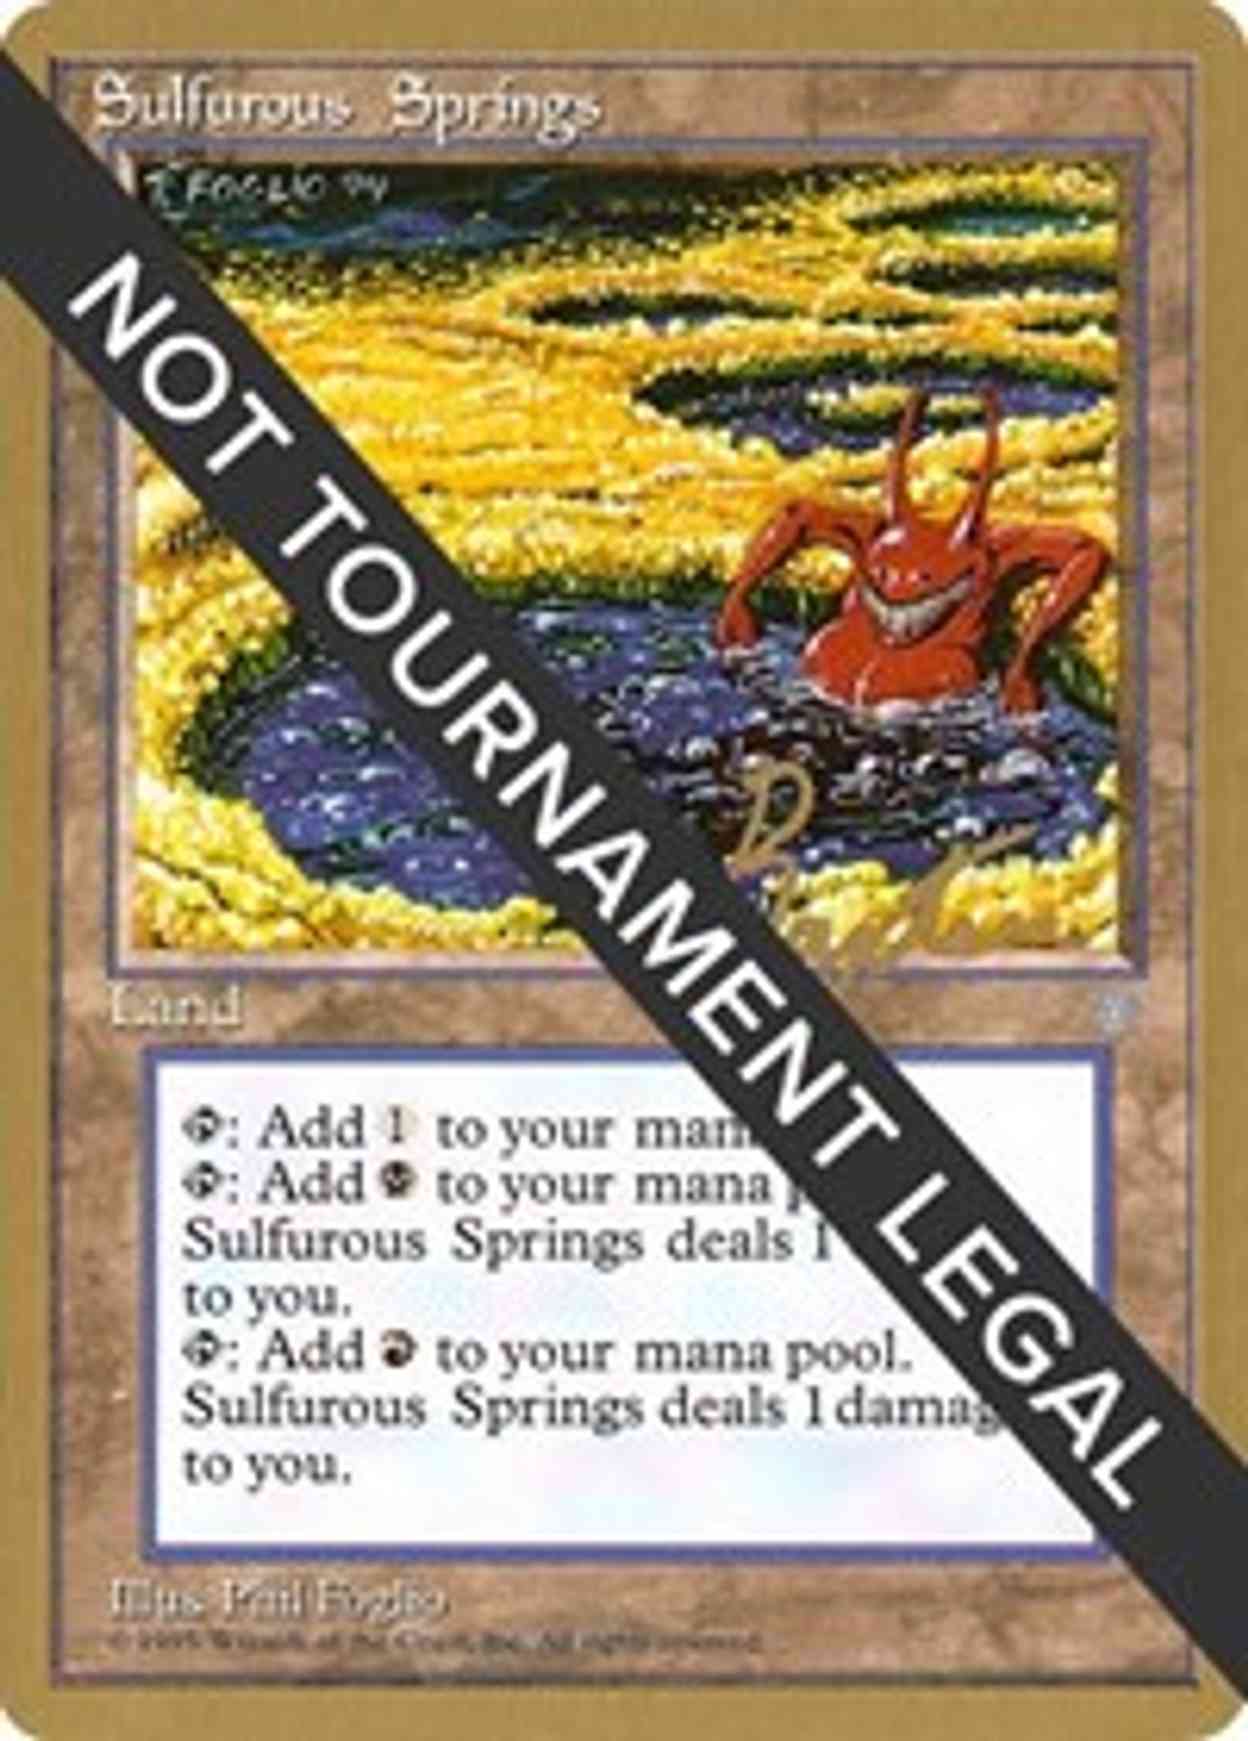 Sulfurous Springs - 1996 George Baxter (ICE) magic card front